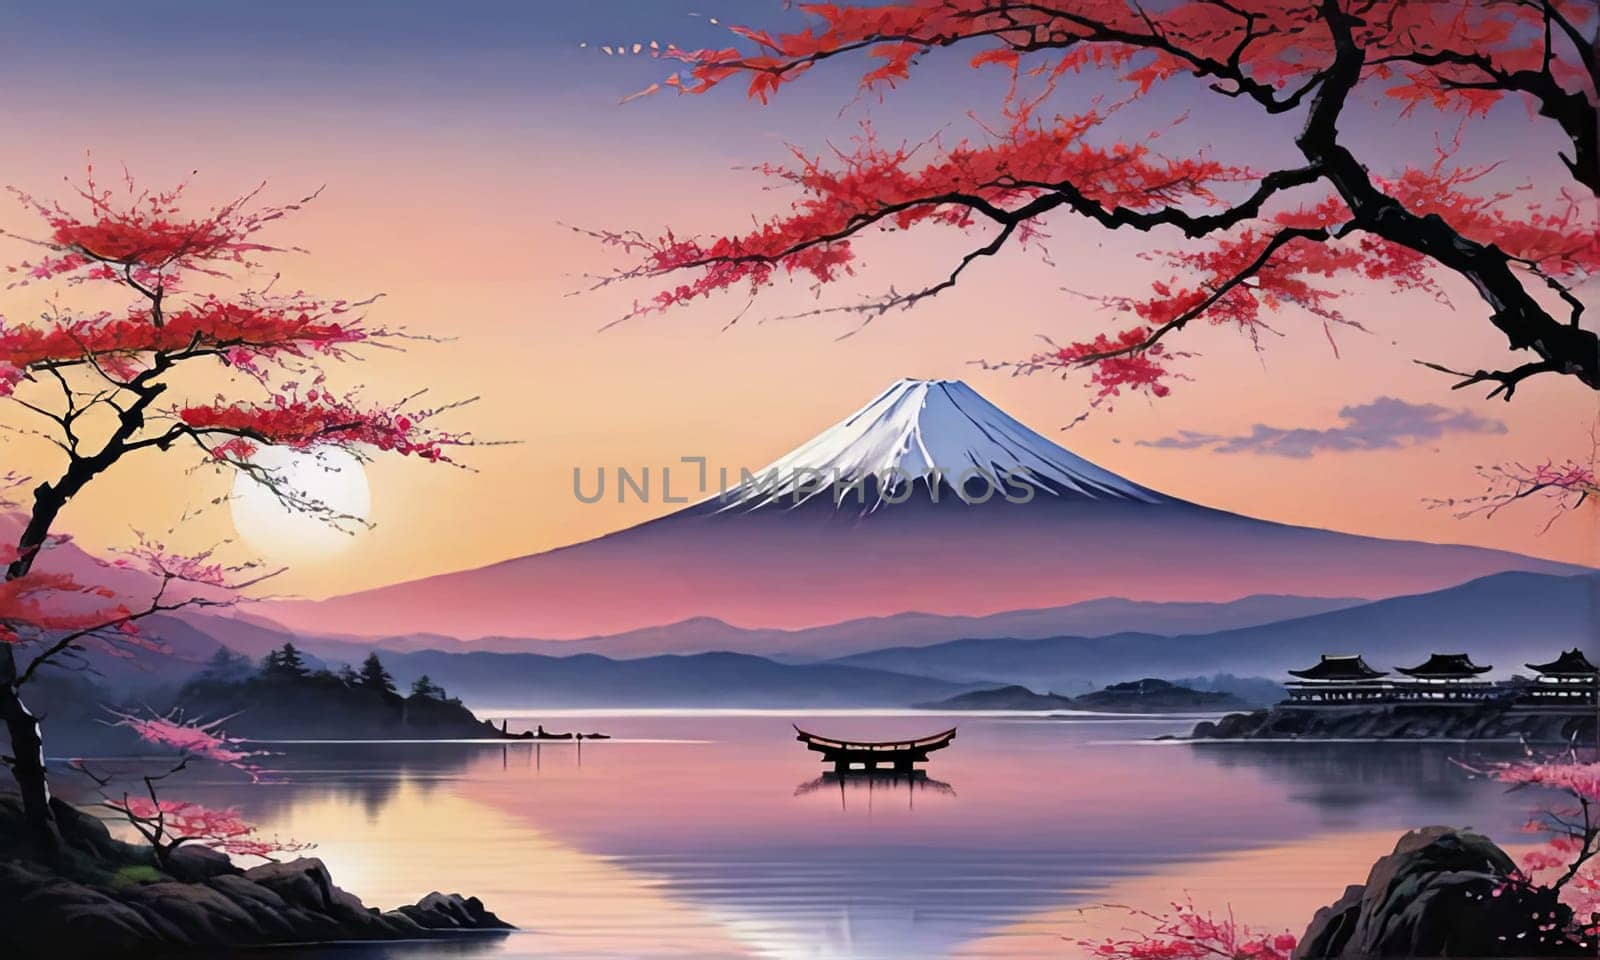 Serene, peaceful, japanese scene of lake with boat in background. Concept of calm, tranquility, as if one were to take break from hustle. For interior, commercial spaces to create stylish atmosphere